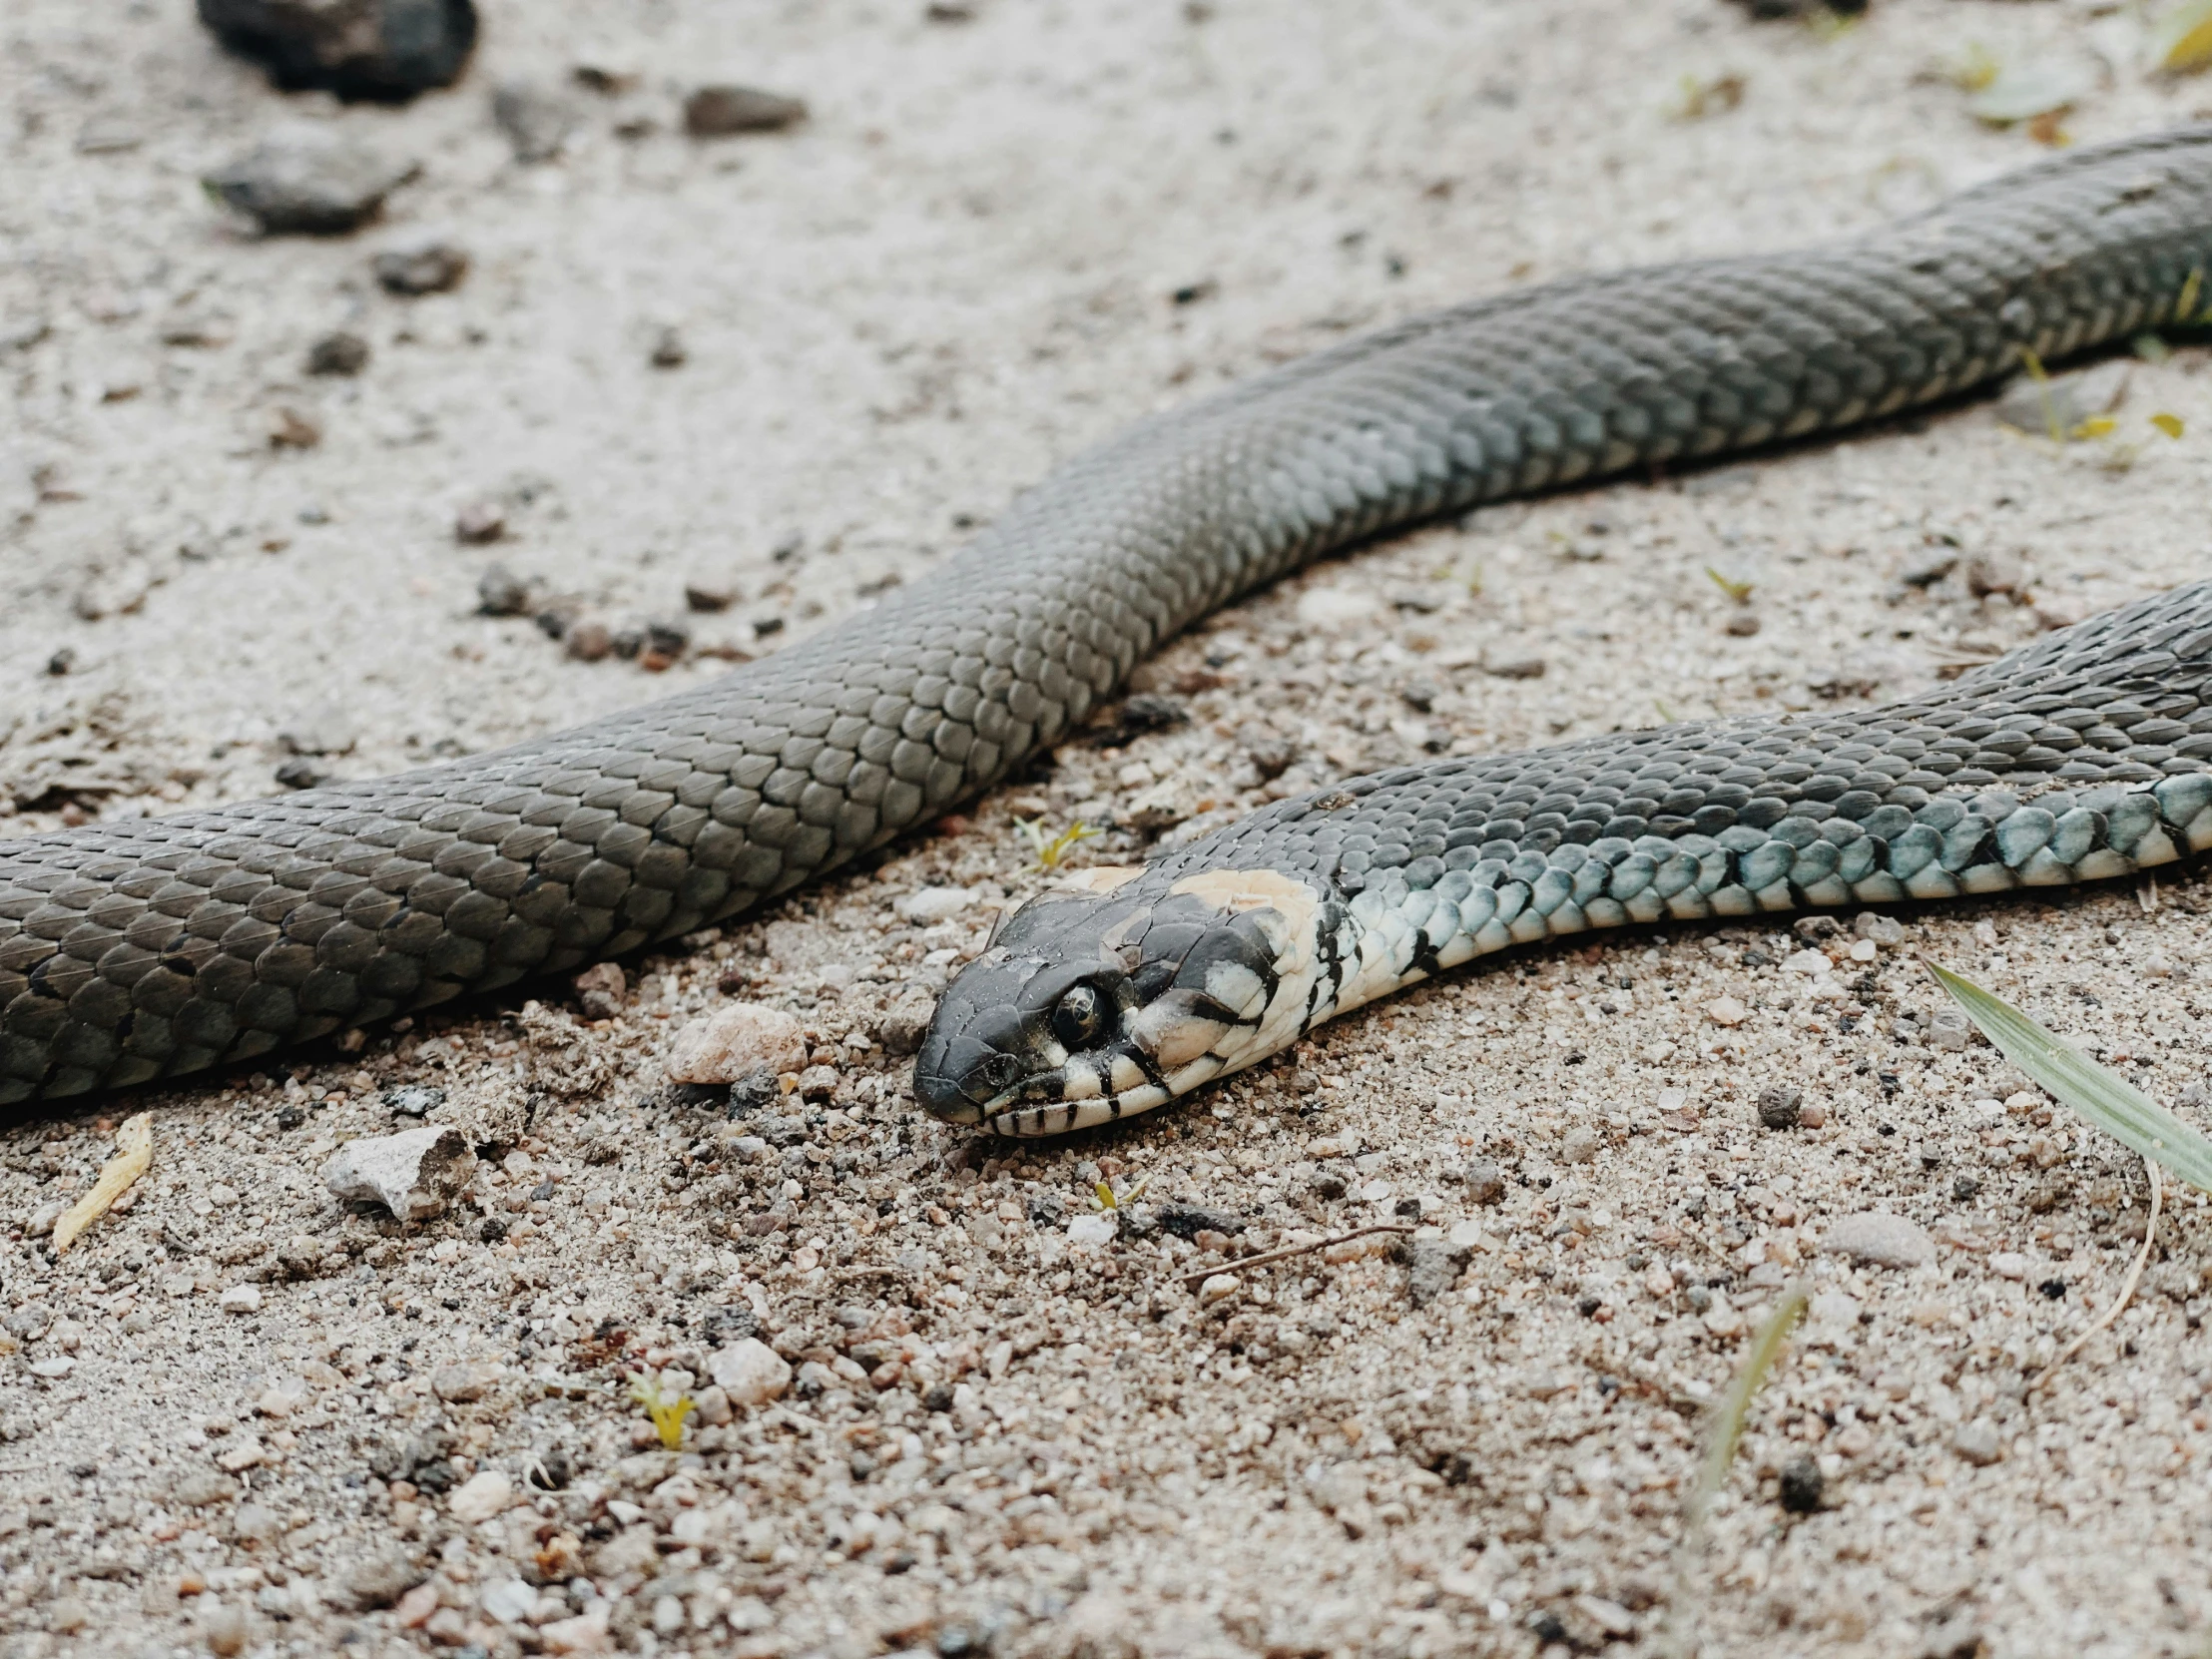 a large snake in the sand with its head under it